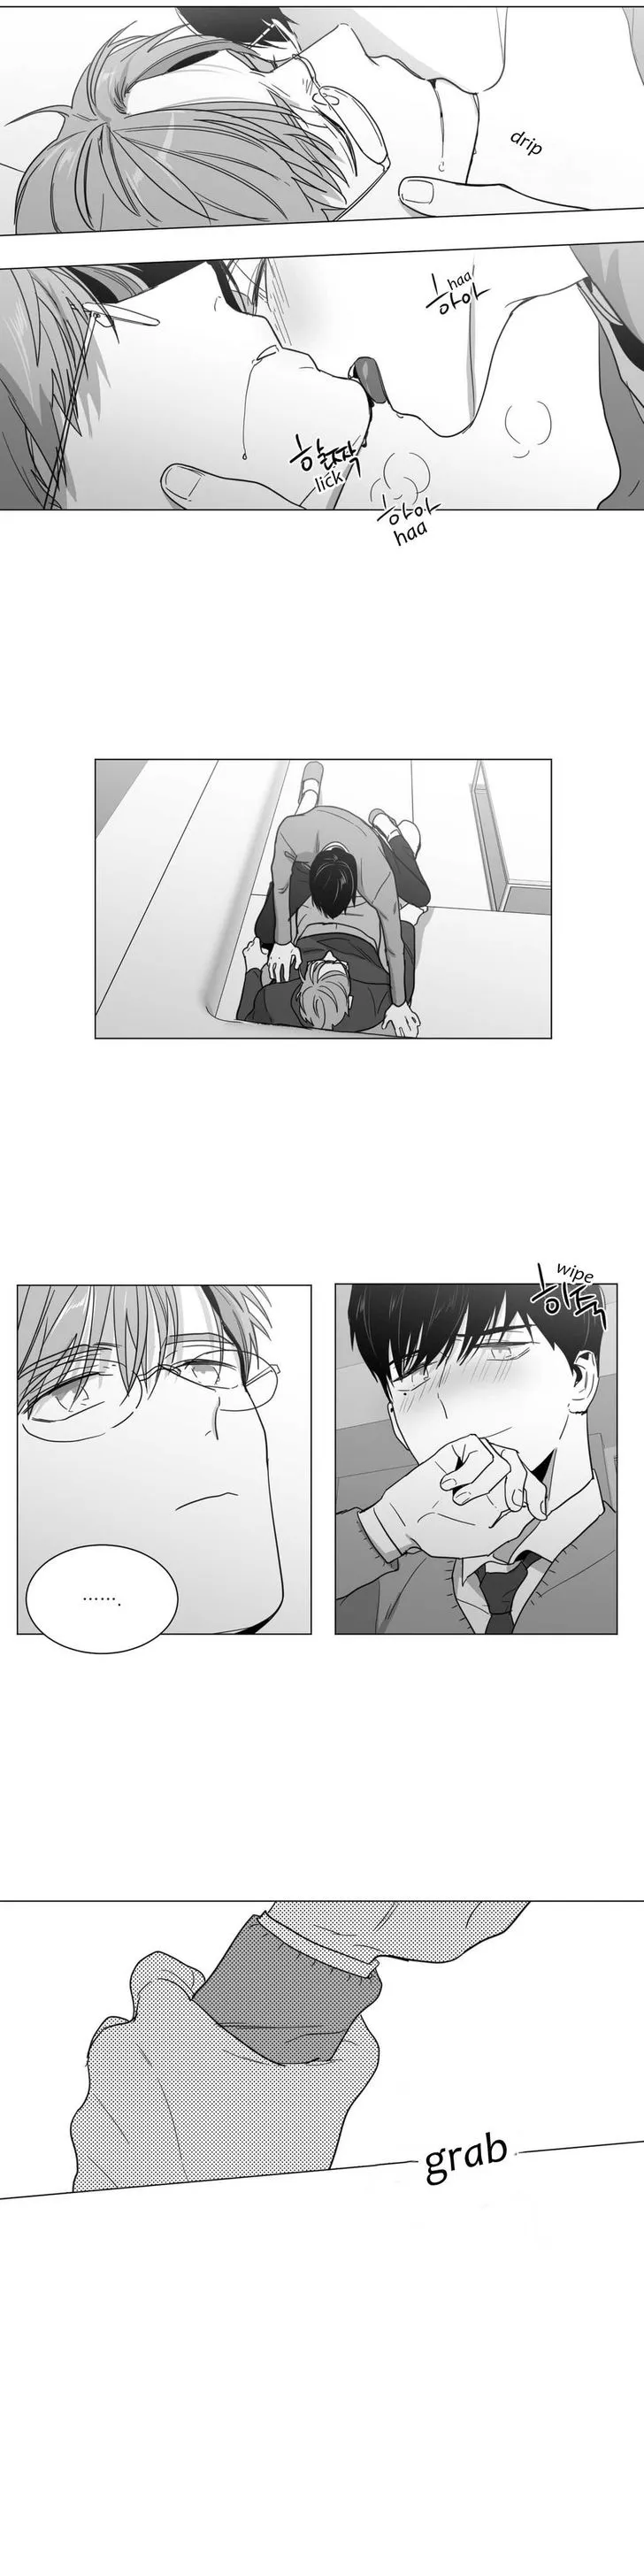 Lover Boy (Lezhin) Chapter 013 page 11